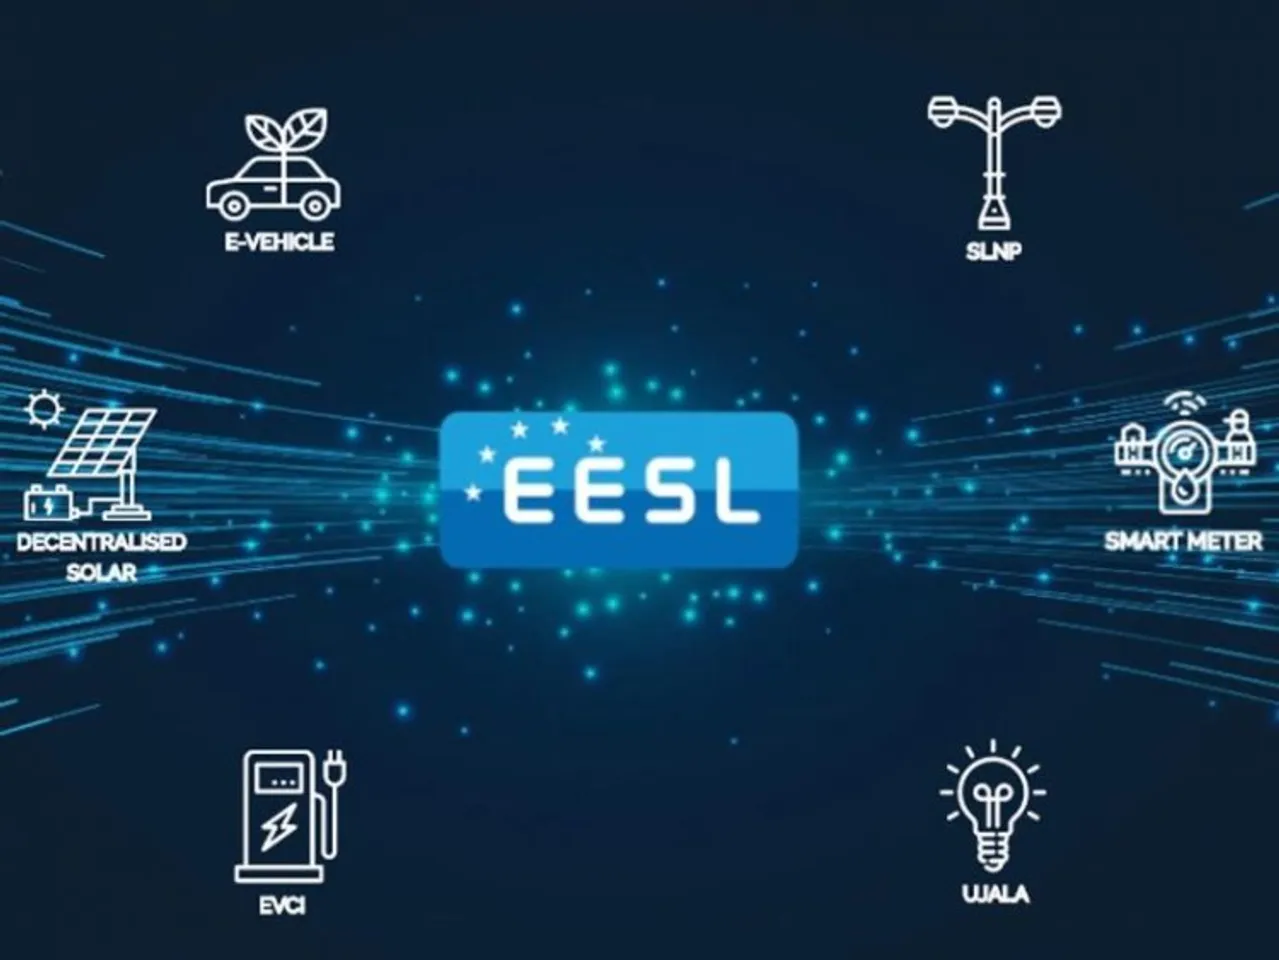 EESL signs agreements to provide energy-efficient solutions